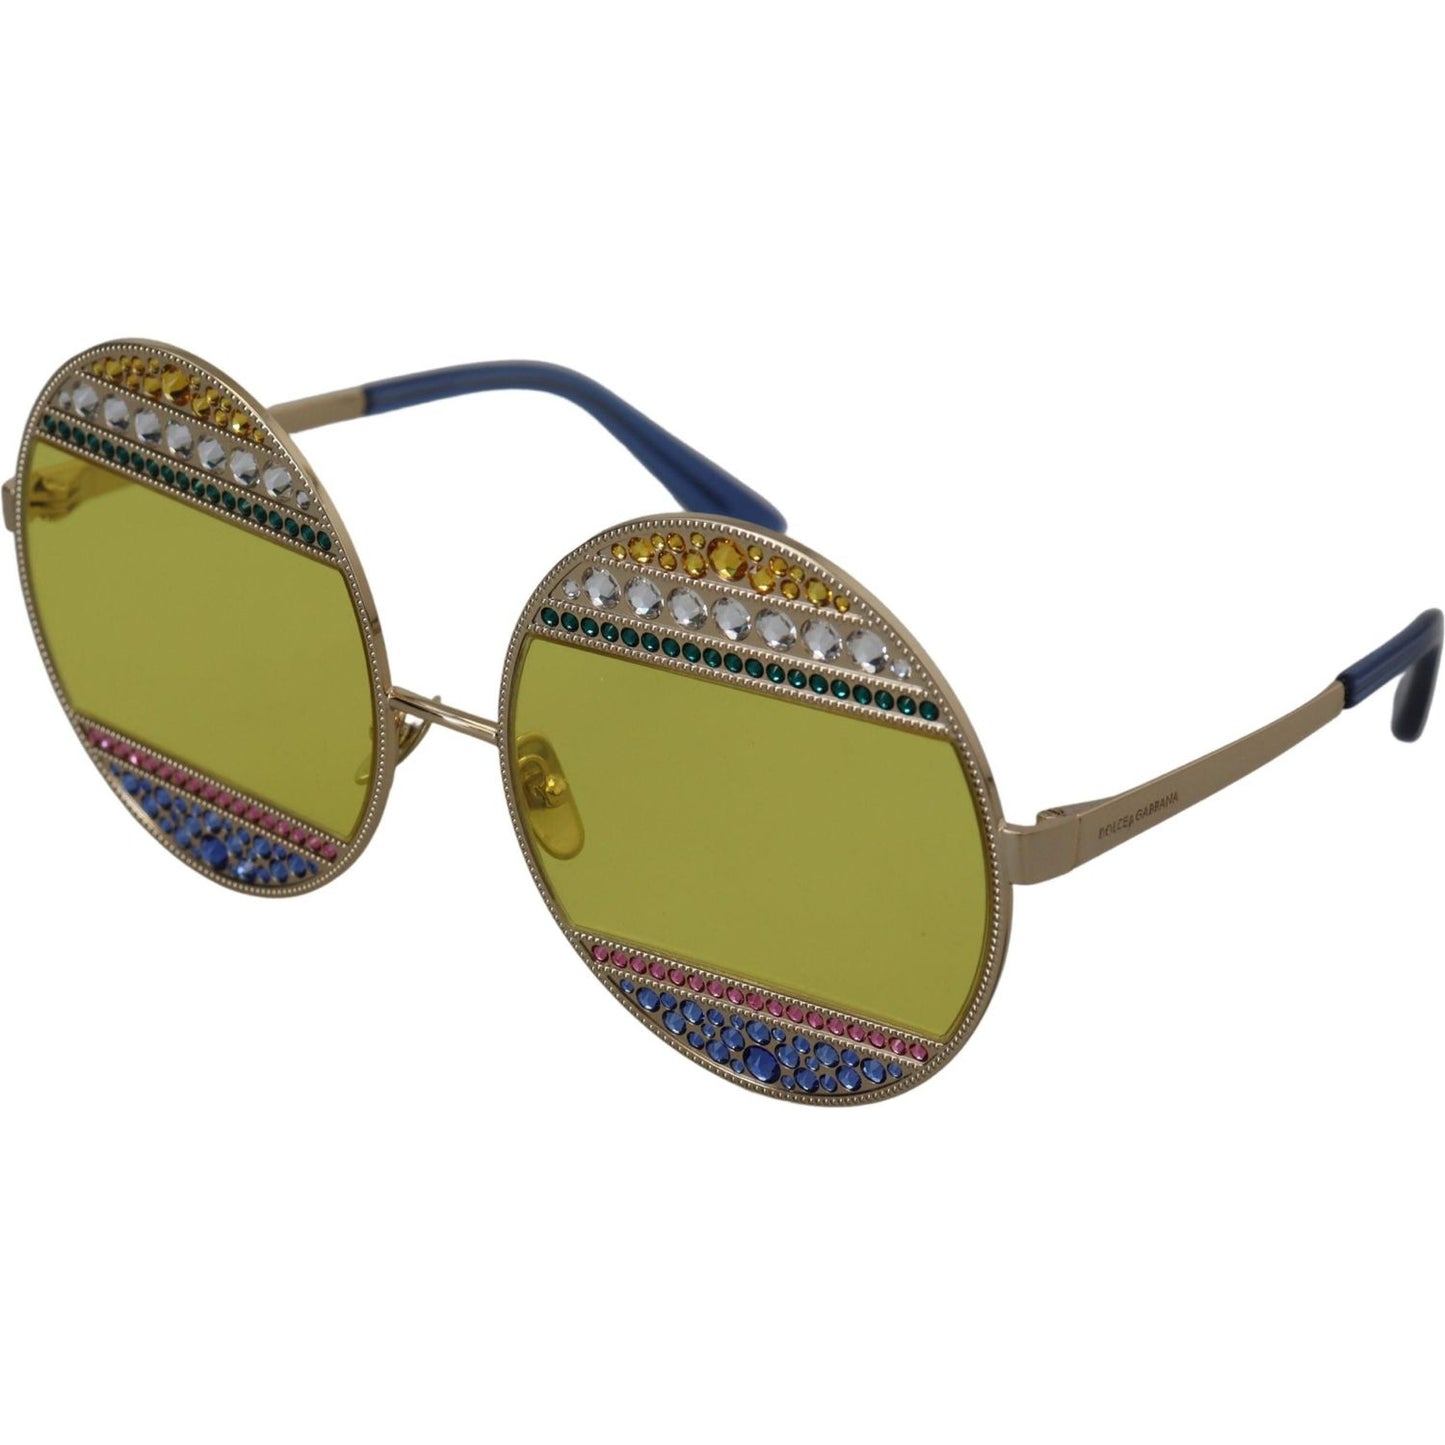 Dolce & Gabbana Crystal Embellished Gold Oval Sunglasses gold-oval-metal-crystals-shades-dg2209b-sunglasses